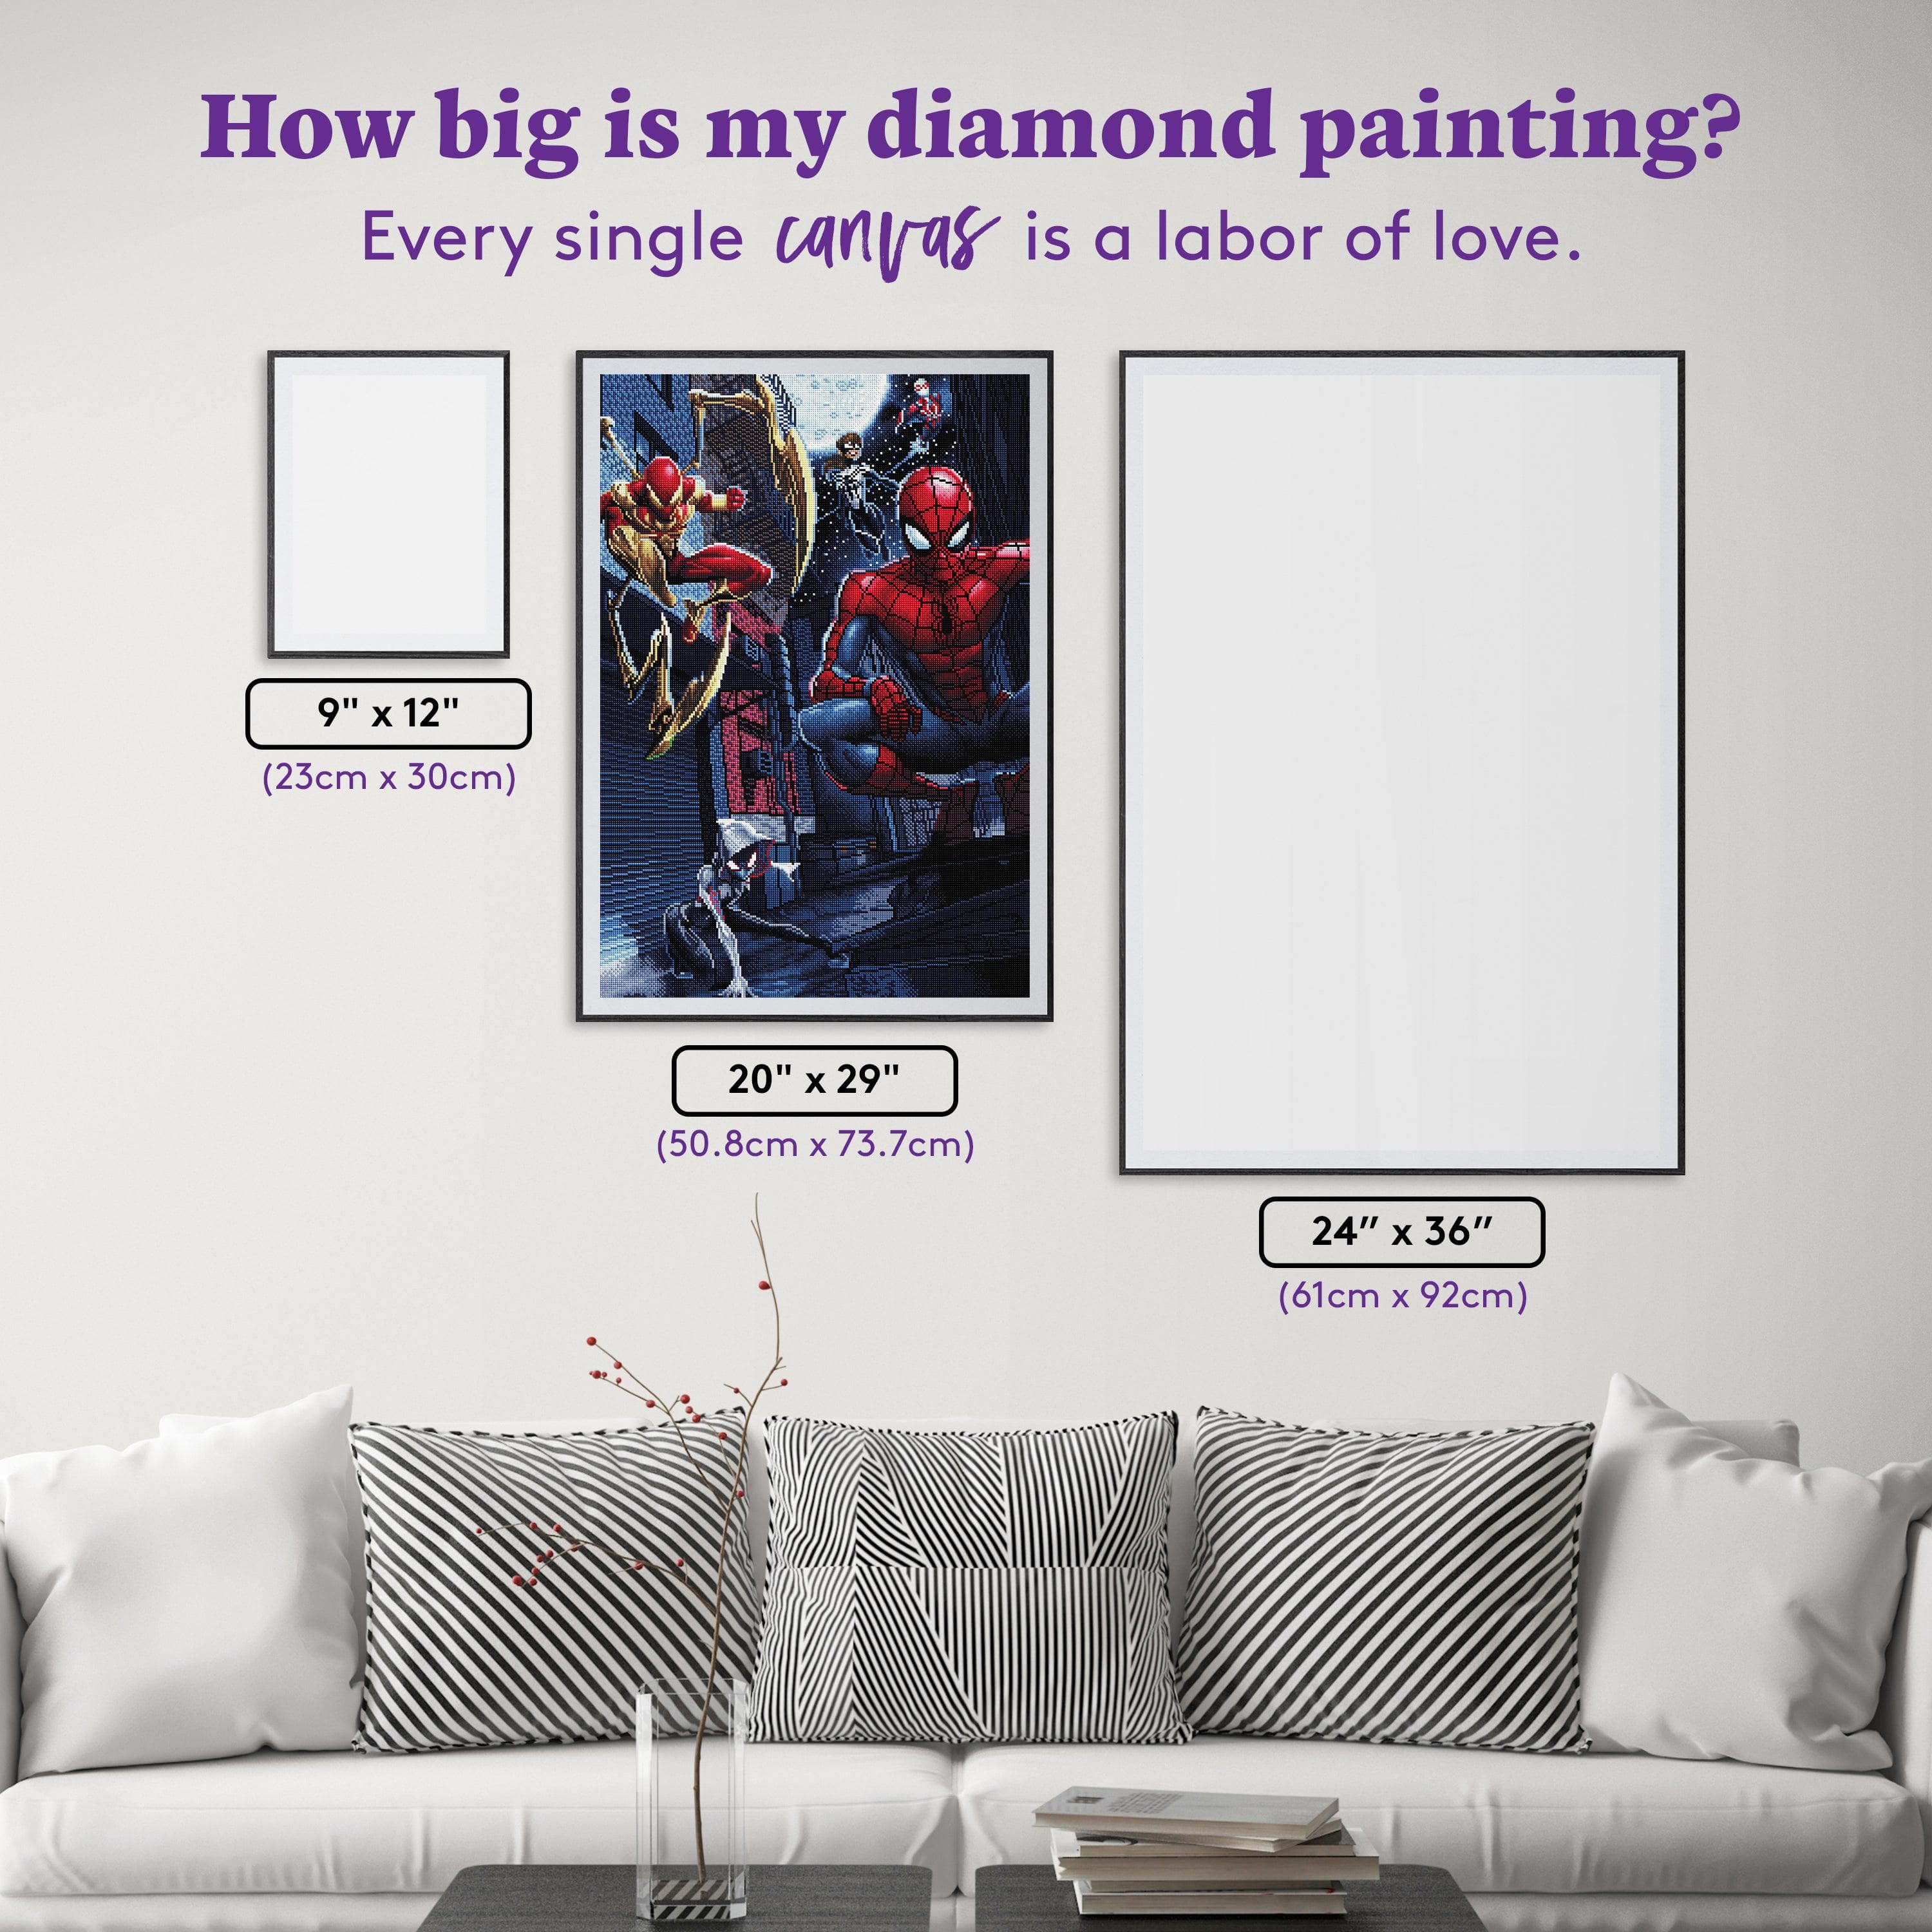 MIRUIKE Trading DIY 5D Spiderman Diamond Painting by Number Kits,Crystal  Rhinestone Diamond Embroidery Paintings Pictures Arts Craft for Home Wall  Decor (Spiderman 230 x 40 cm) - DIY 5D Spiderman Diamond Painting